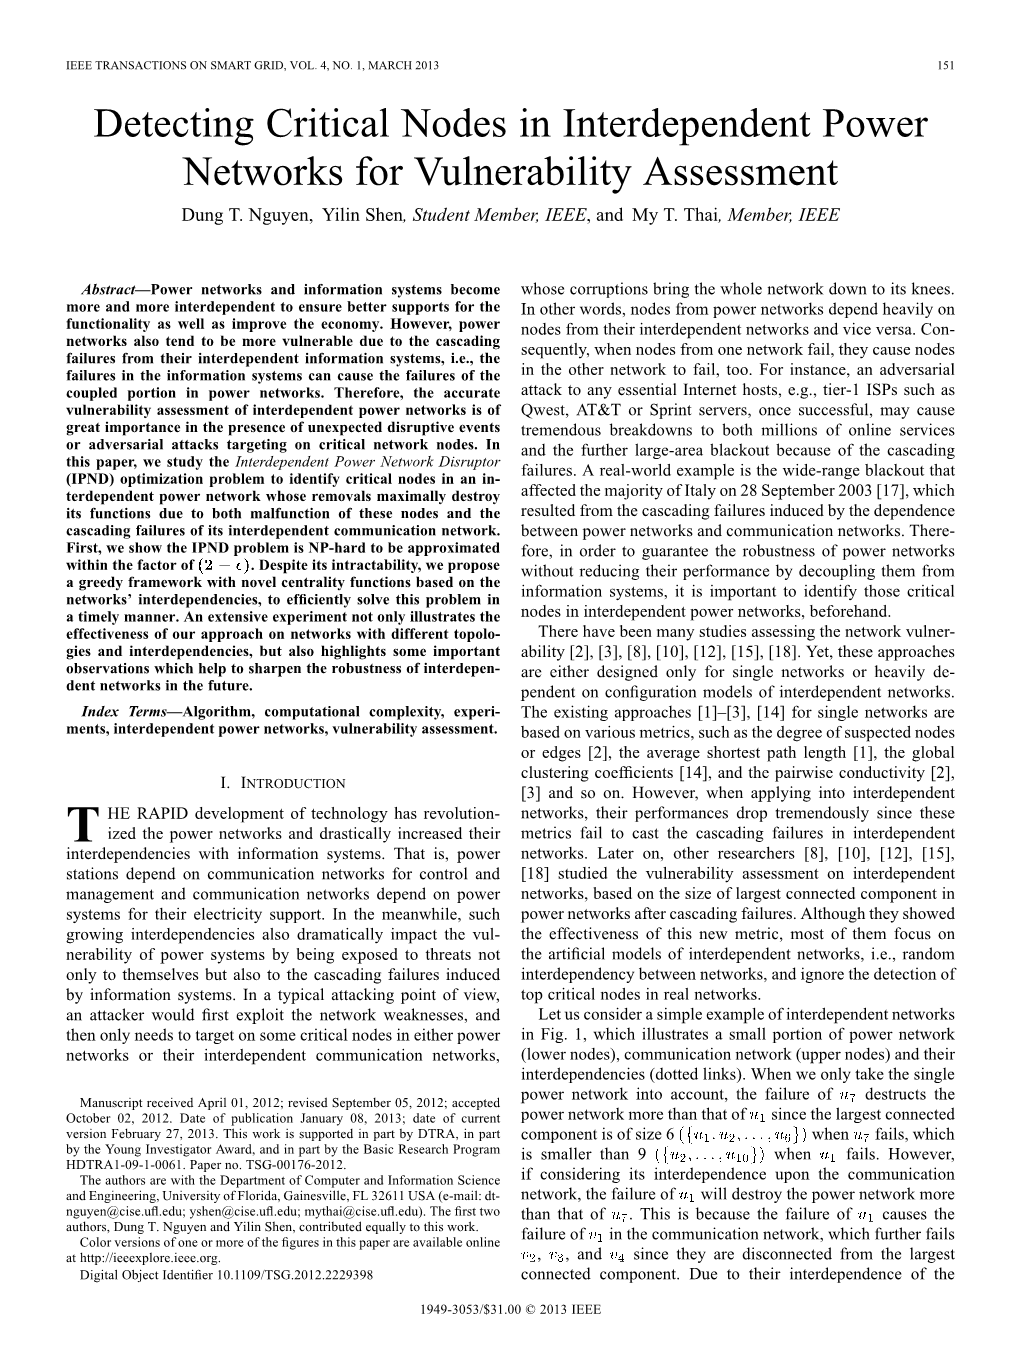 Detecting Critical Nodes in Interdependent Power Networks for Vulnerability Assessment Dung T